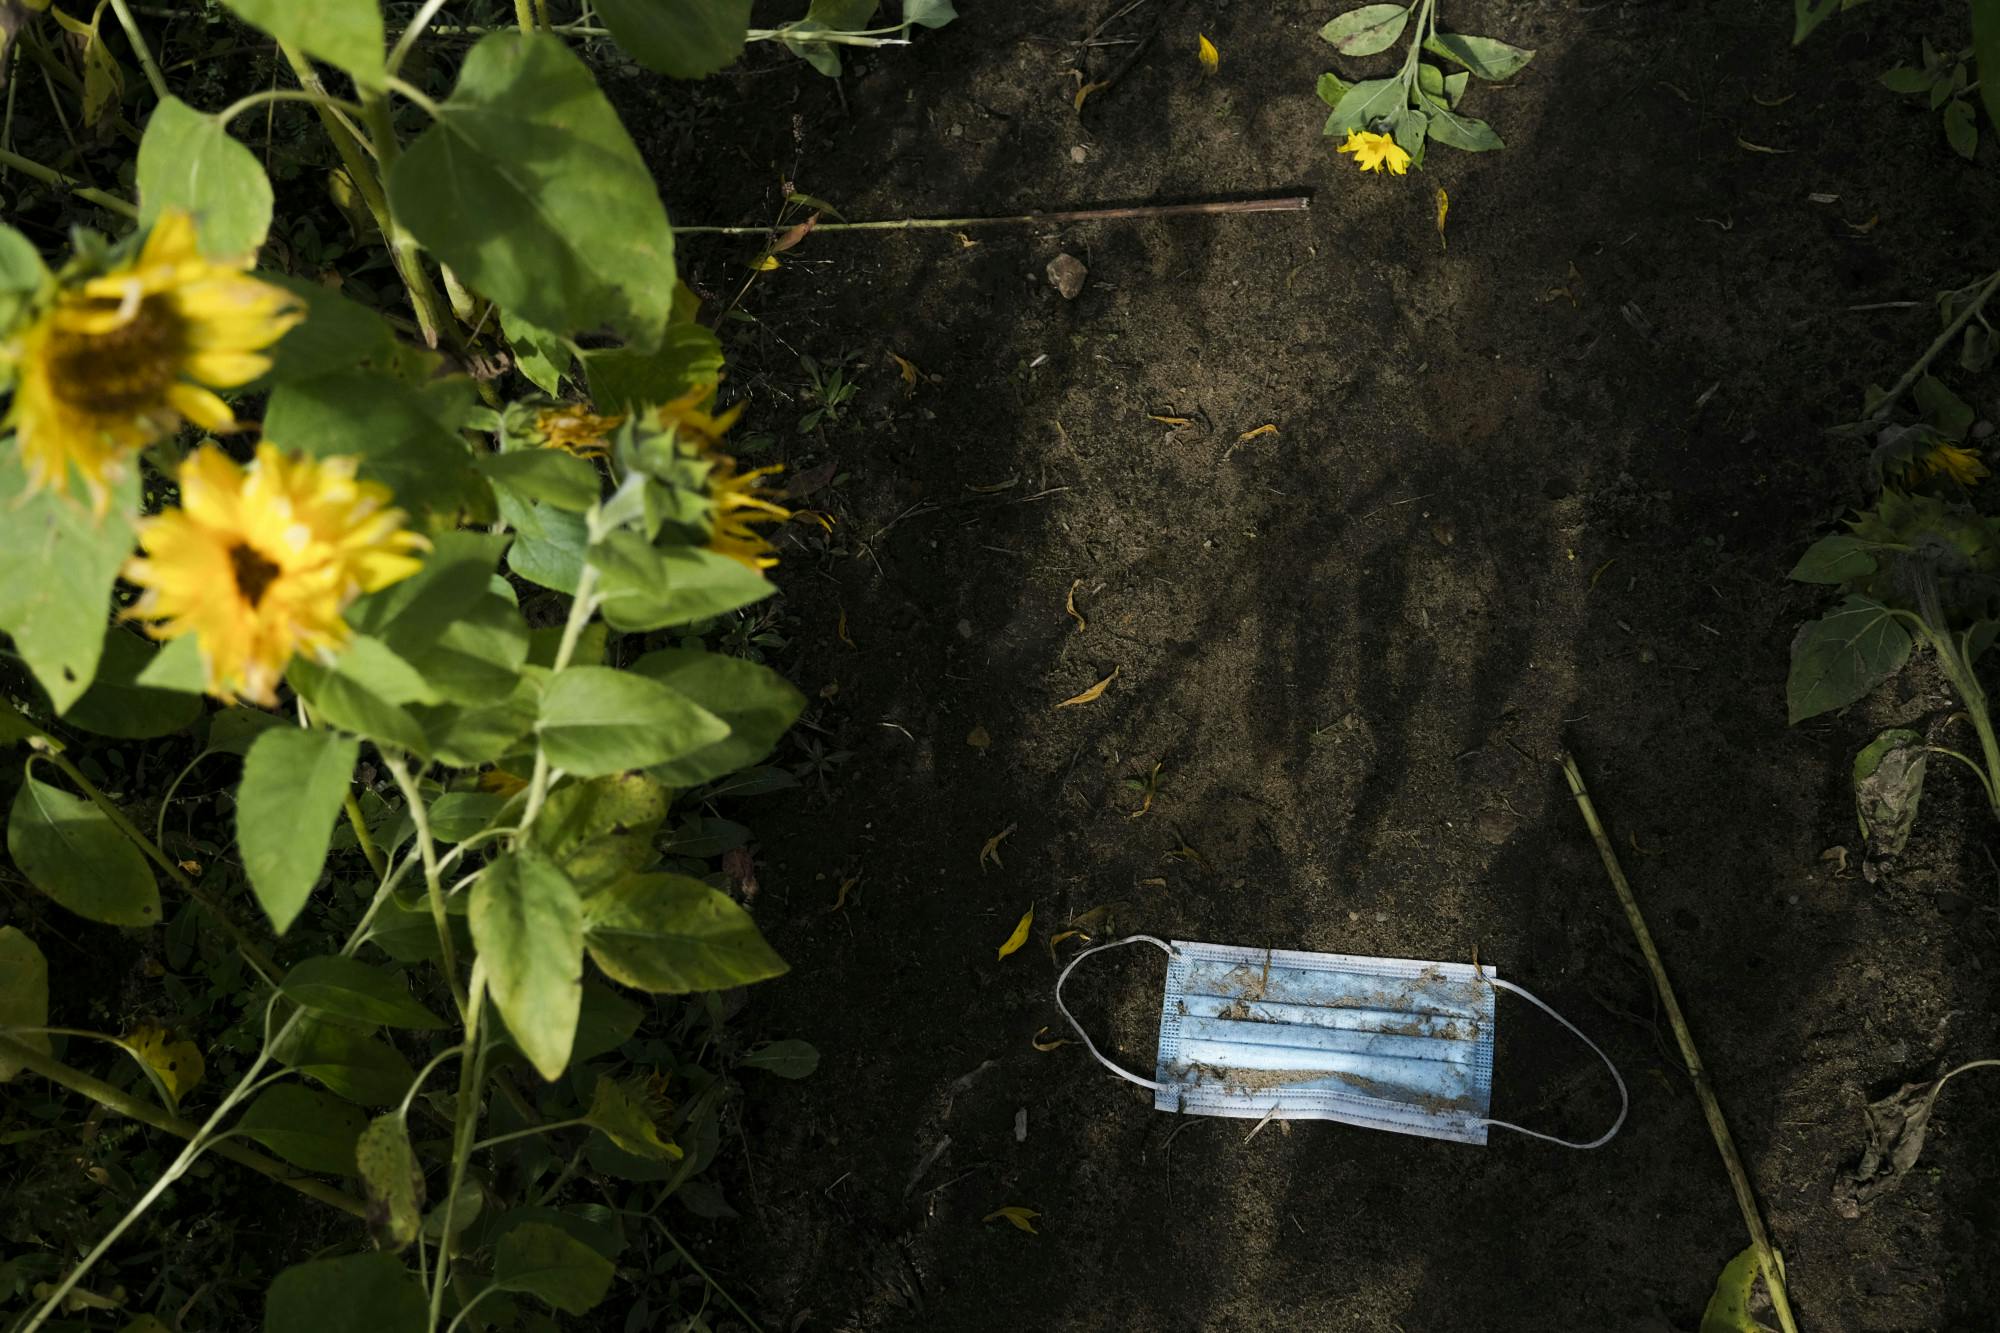 A discarded mask in a sunflower field.